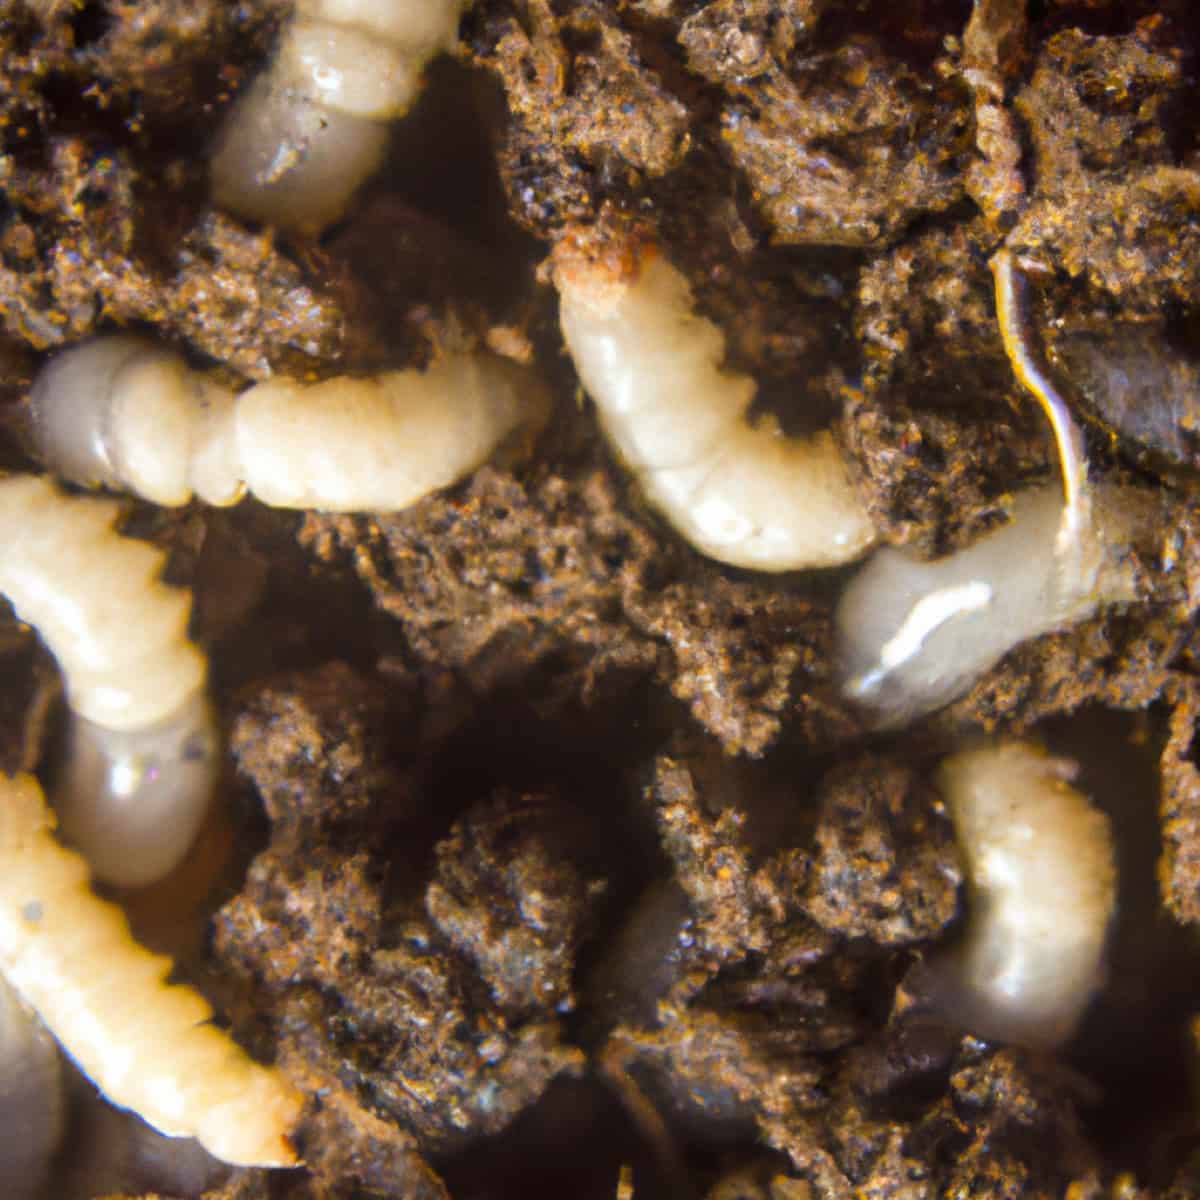 How to Identify and Control Root Maggots